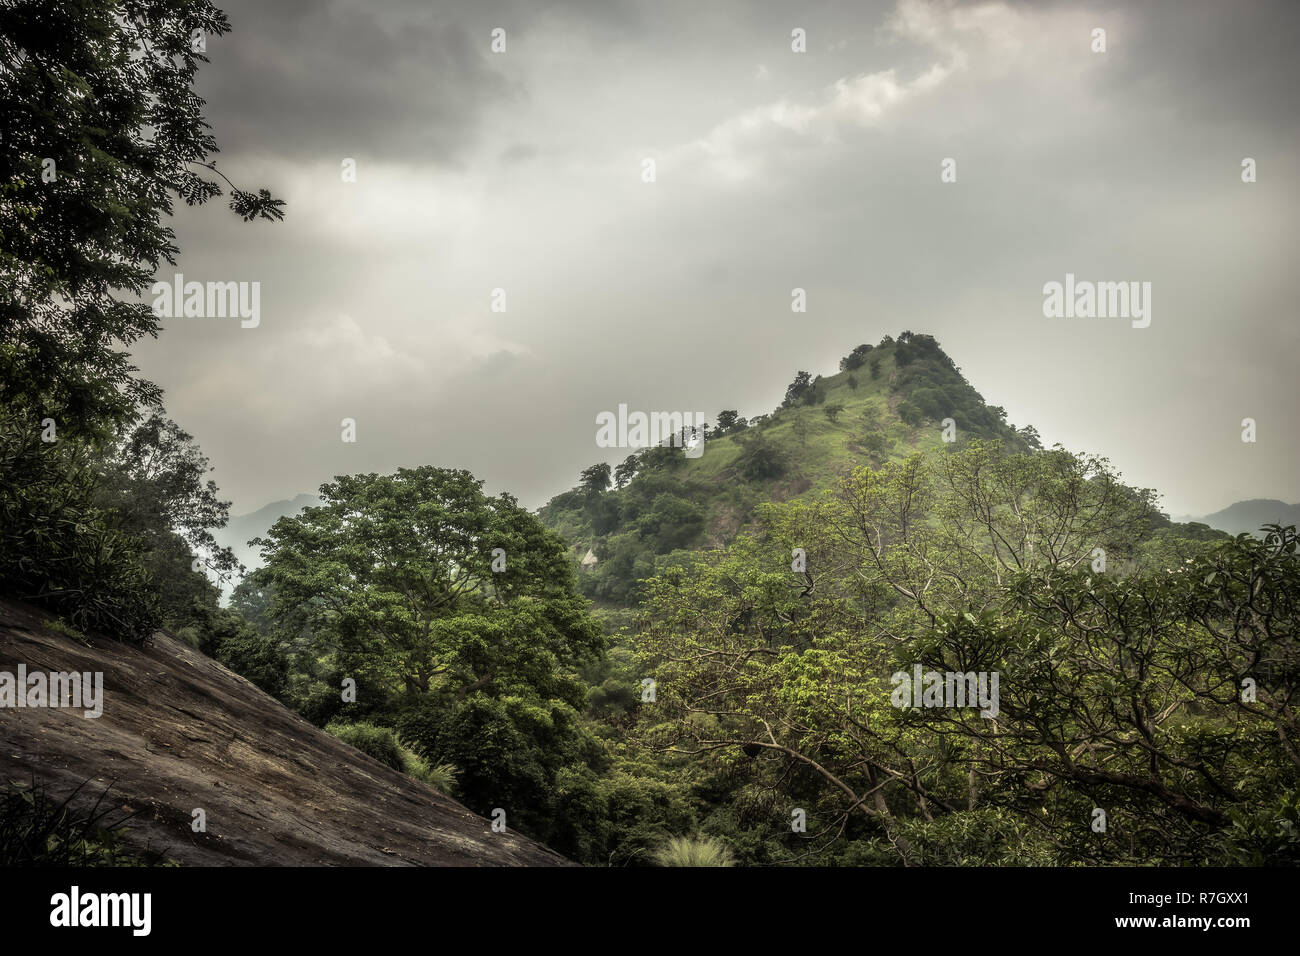 Highlands hill forest scenery landscape with dramatic sky in Asian Sri Lanka Dambulla surroundings Stock Photo